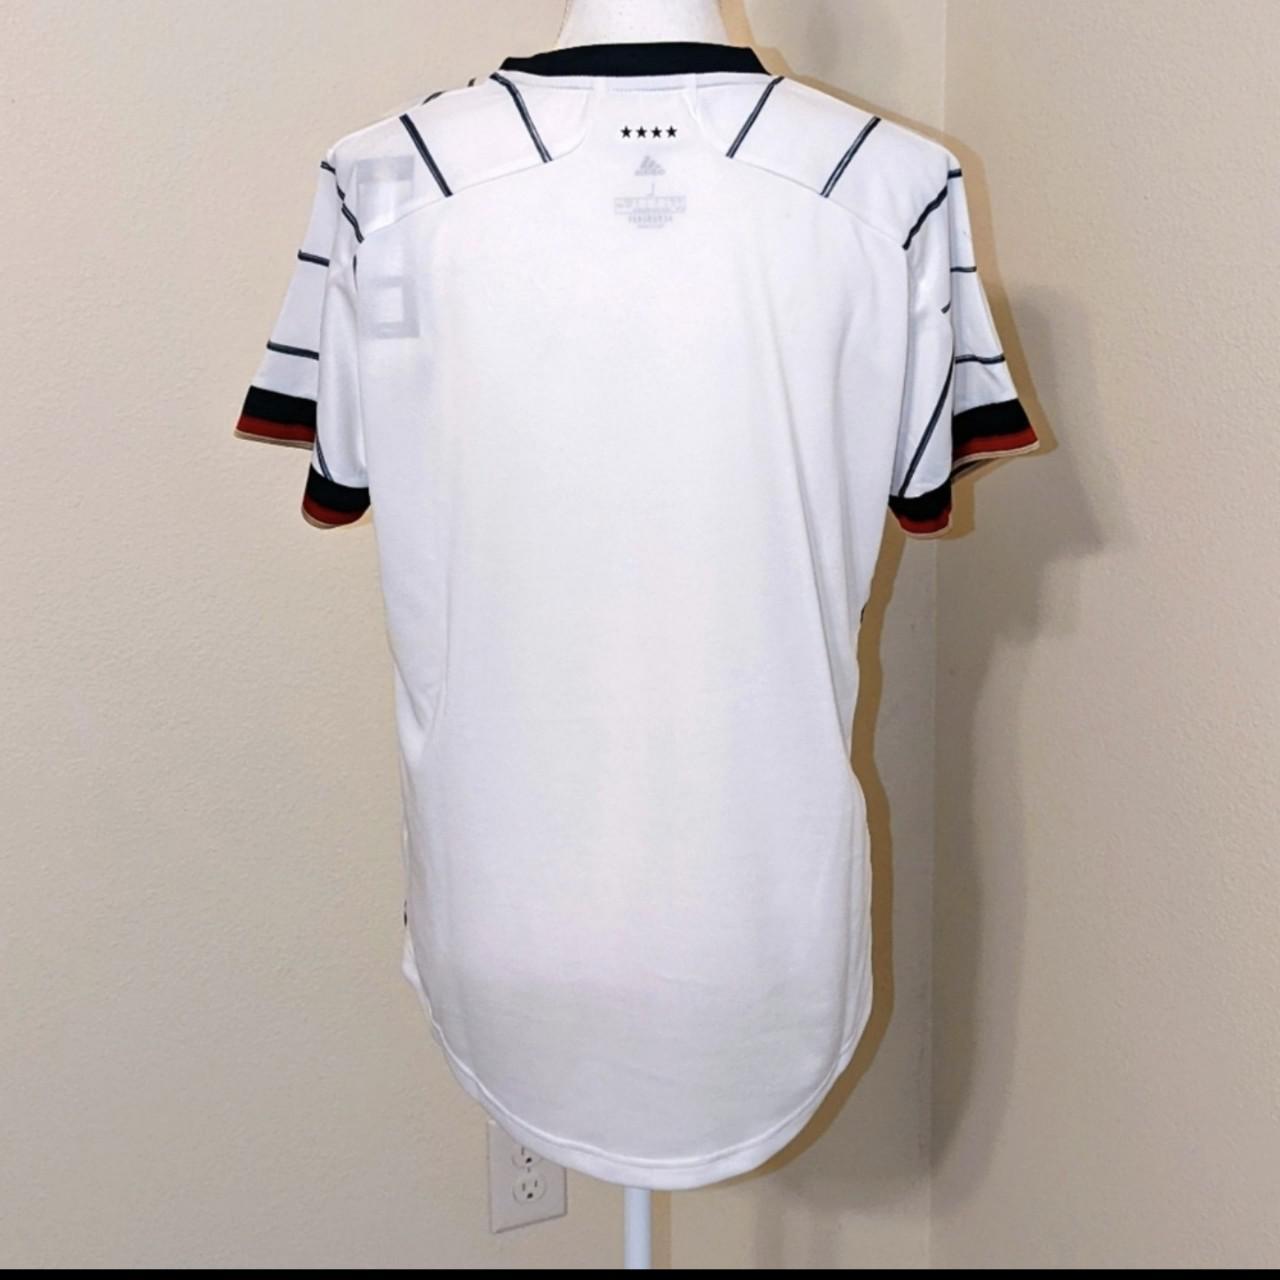 Product Image 2 - Adidas Germany national soccer team